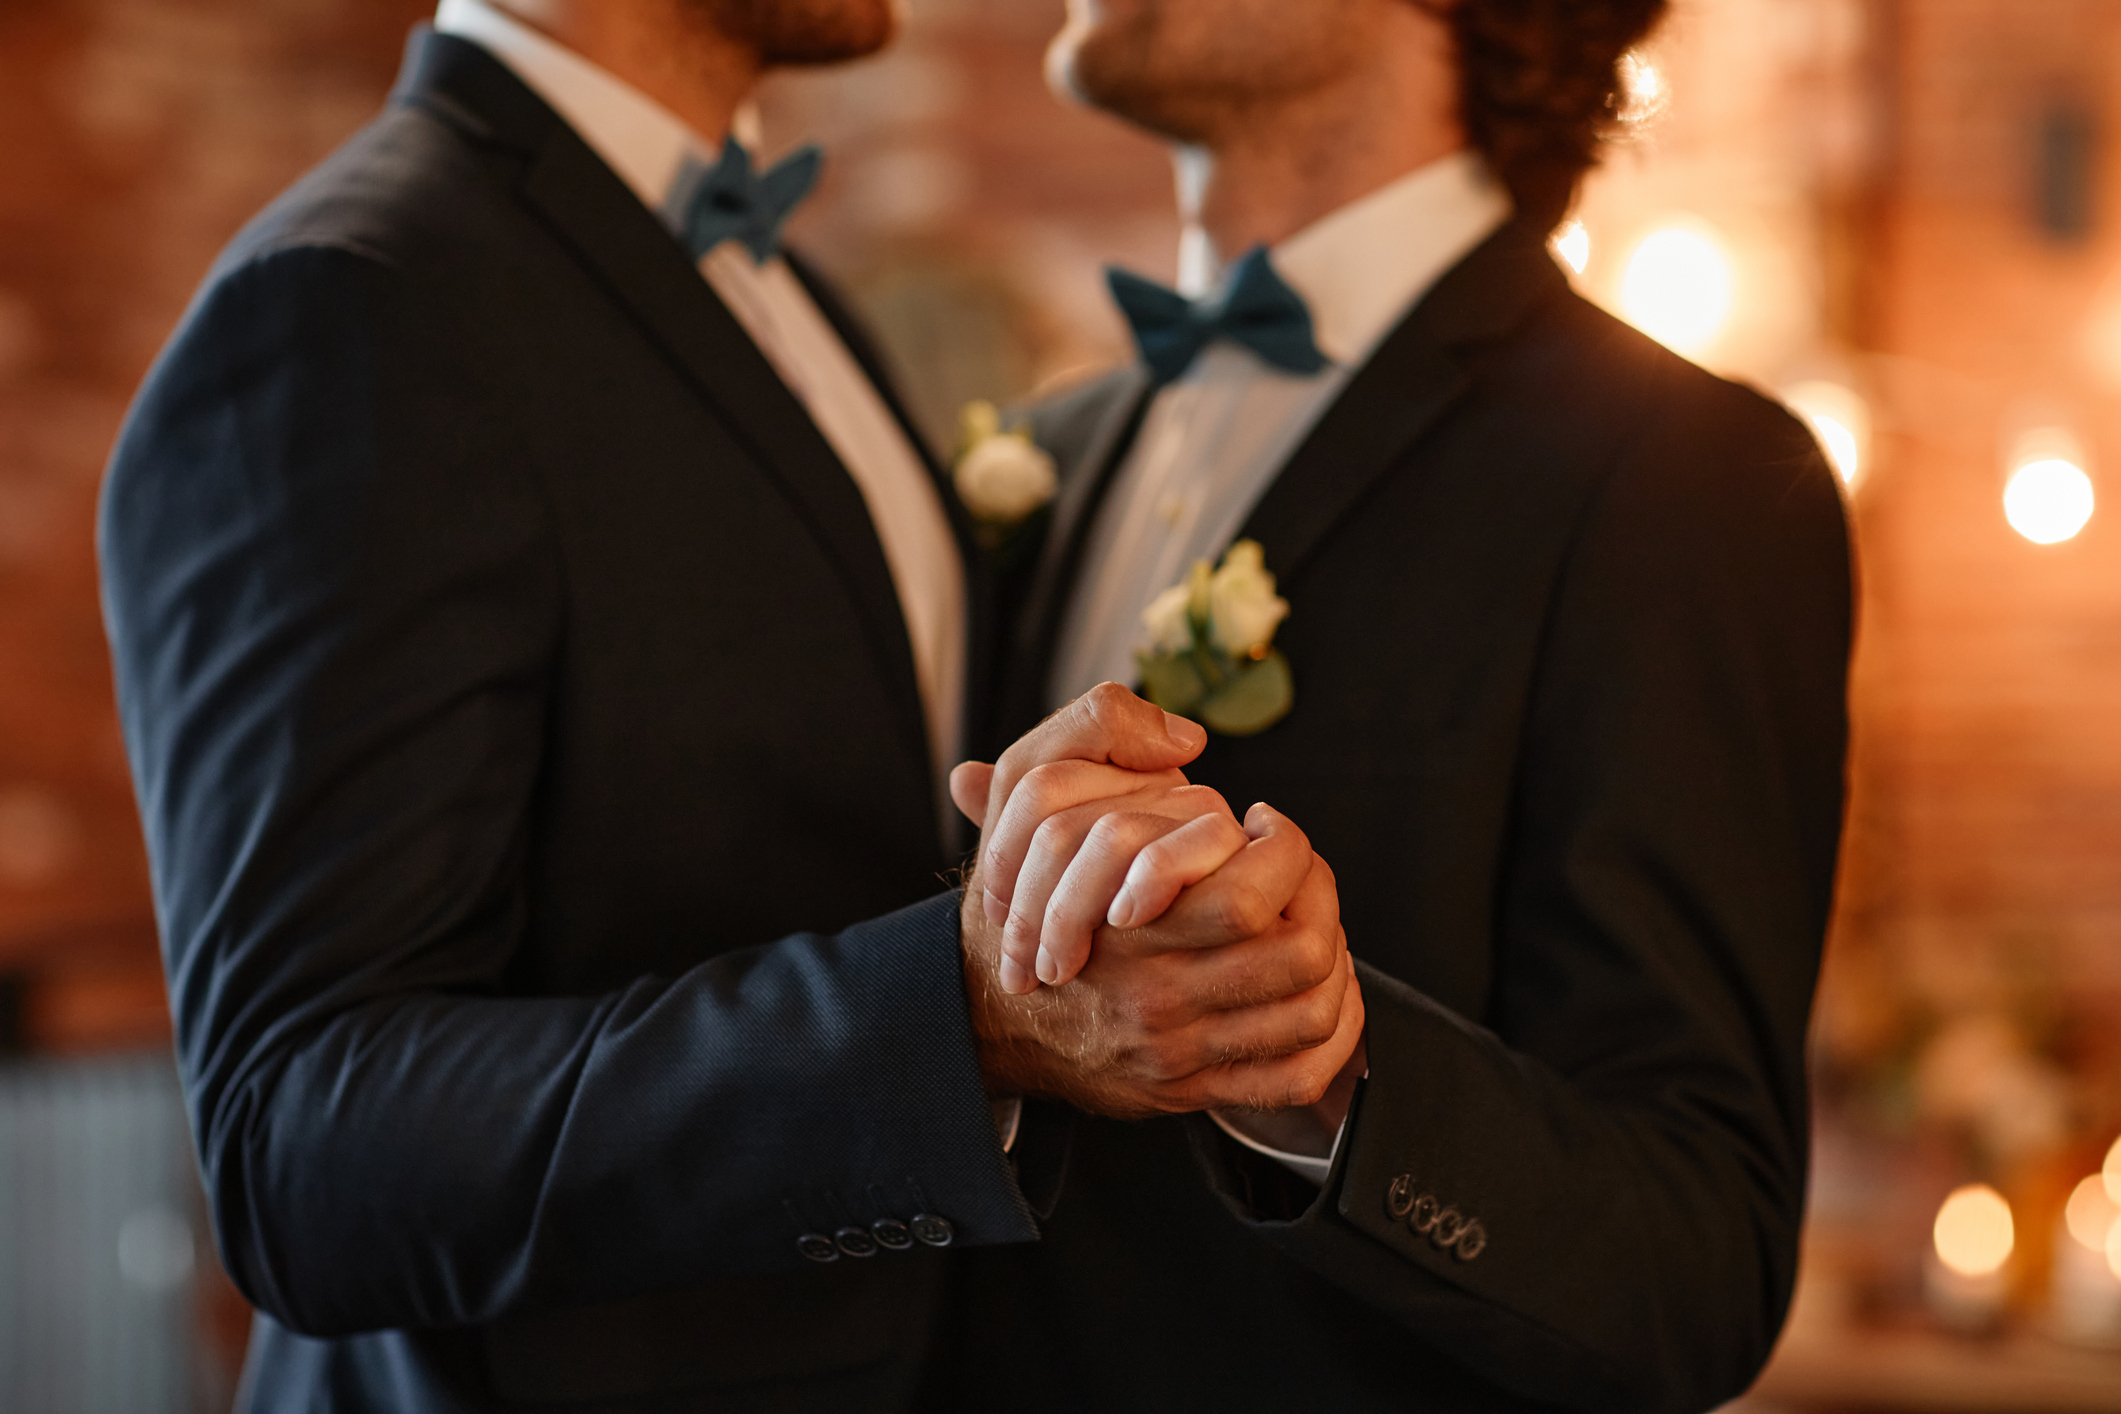 Two individuals in suits with bowties holding hands, likely in a wedding ceremony